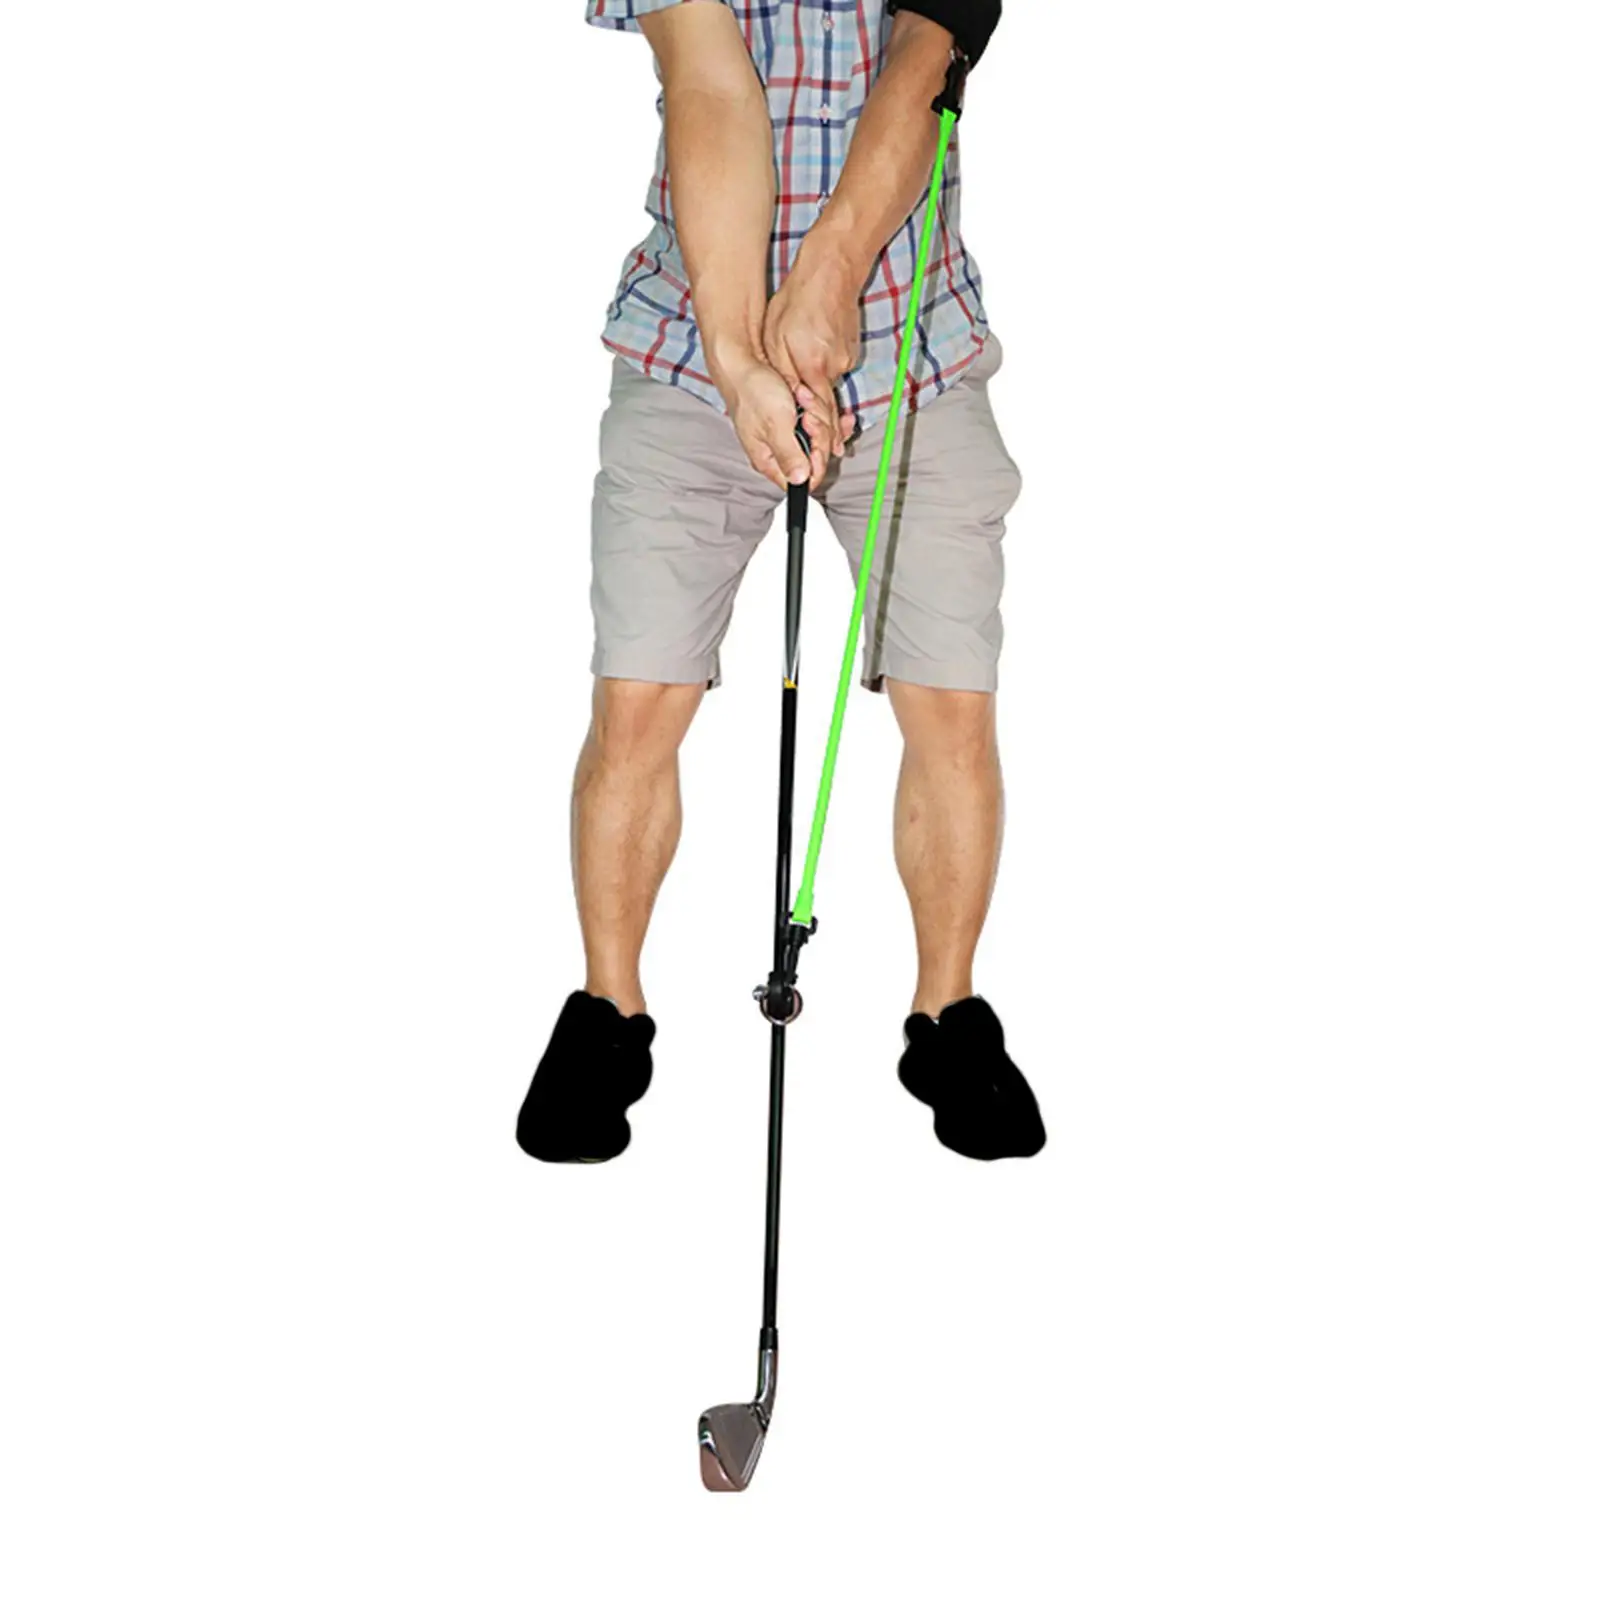 Golf Swing Trainer Golf Training Aid for Improving Swing Stability and Power